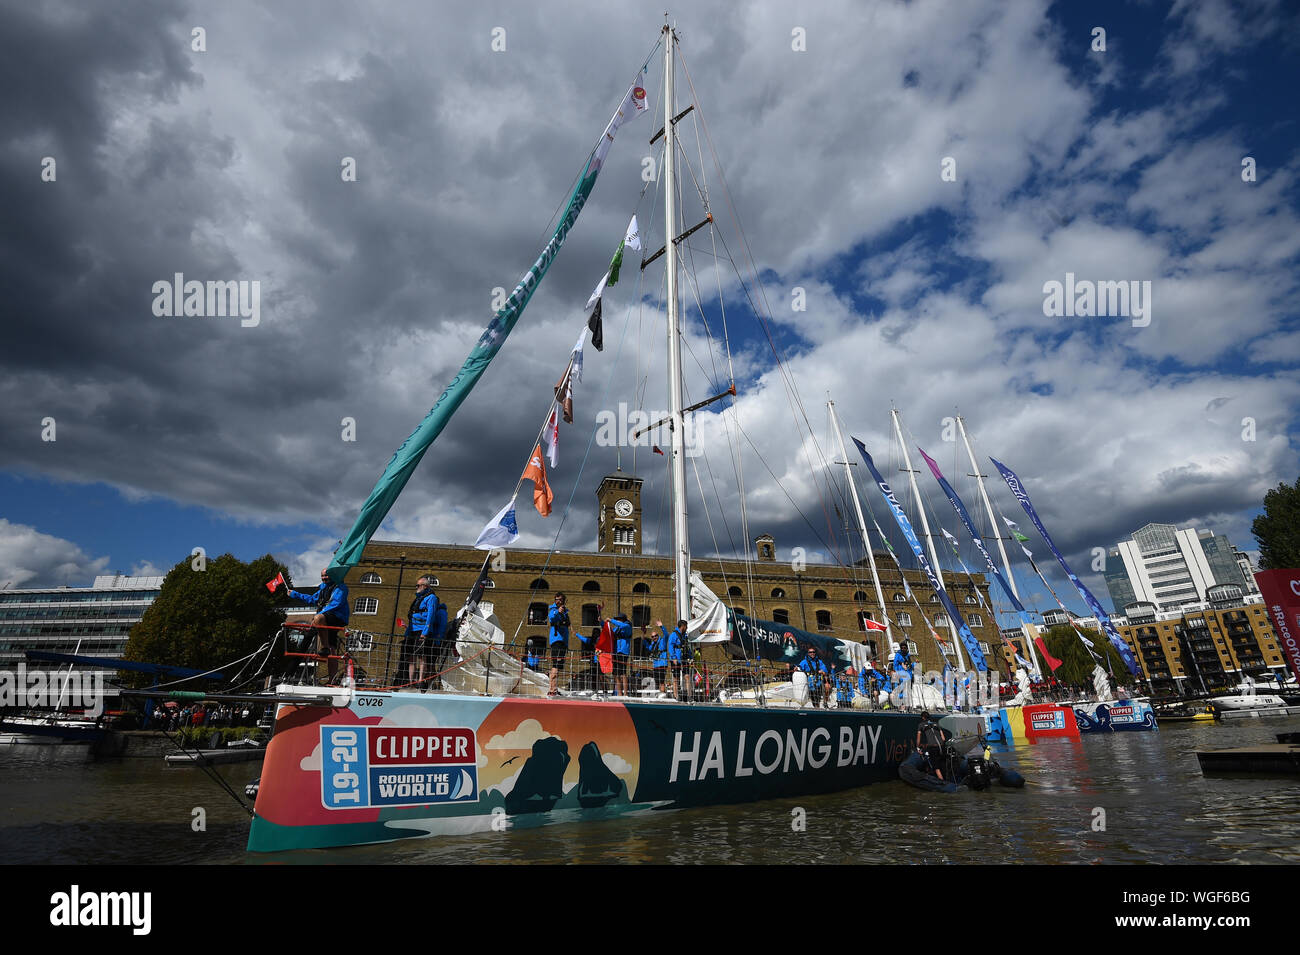 The Ha Long Bay Viet Nam team, one of 11 taking part in the Clipper Round the World Race, waves to crowds at the Departure Ceremony at St Katharine Docks Marina by the river Thames in central London, before their departure down the river. Stock Photo